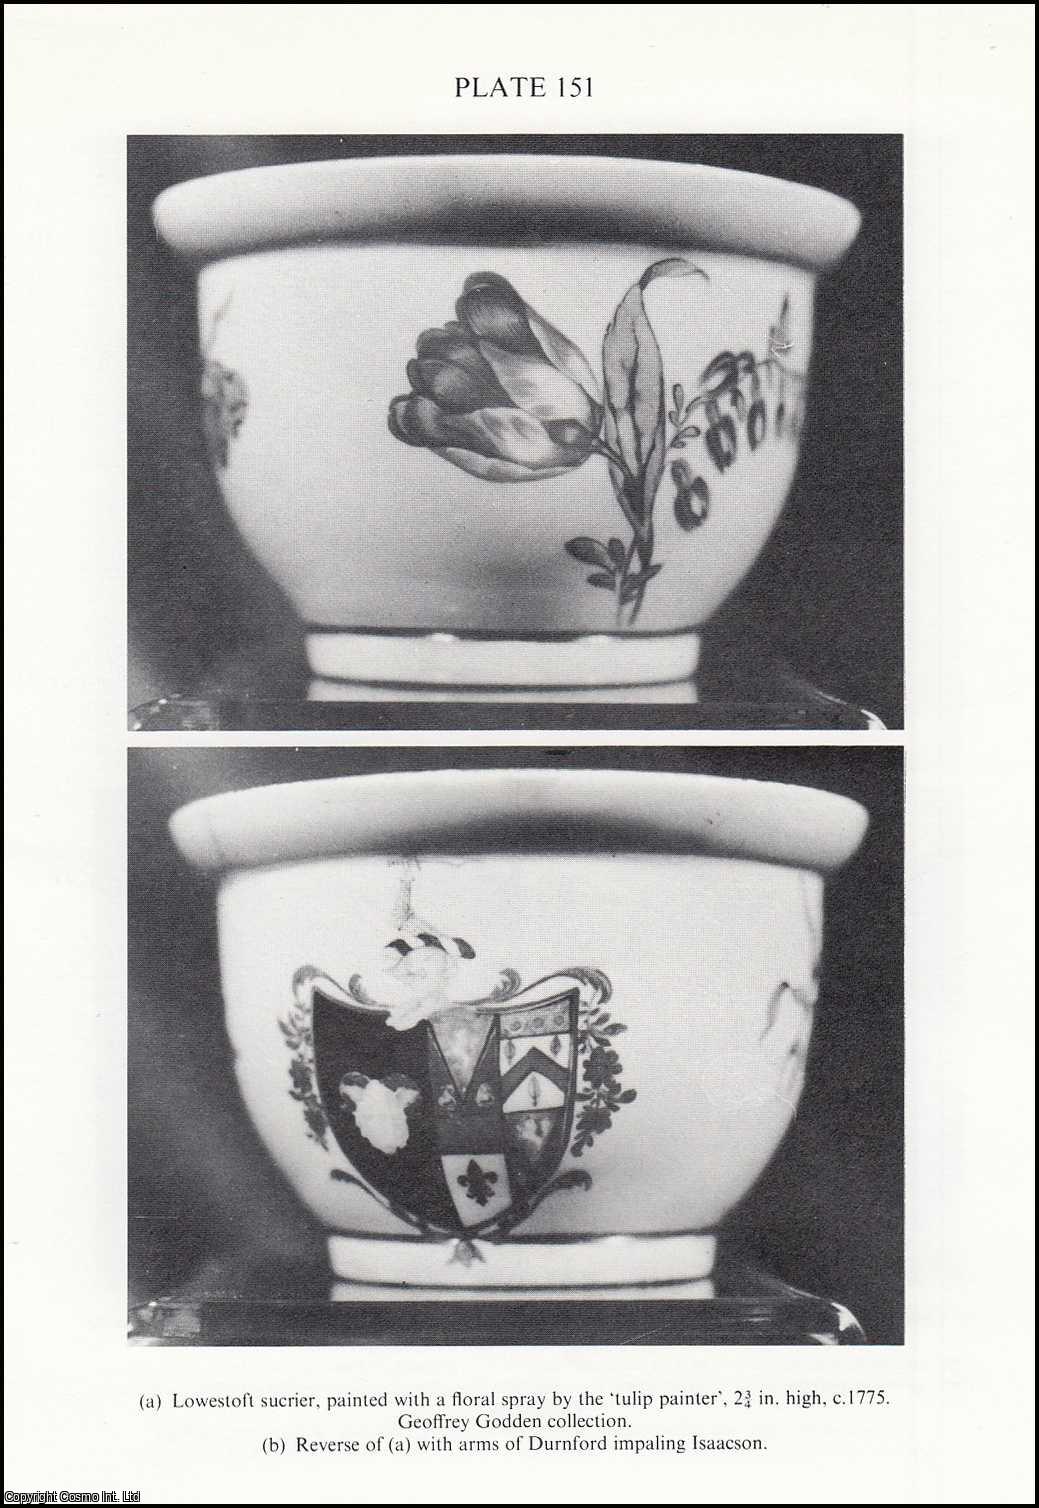 John Howell - Armorial Lowestoft: A London Connection. An original article from the English Ceramic Circle, 1986.